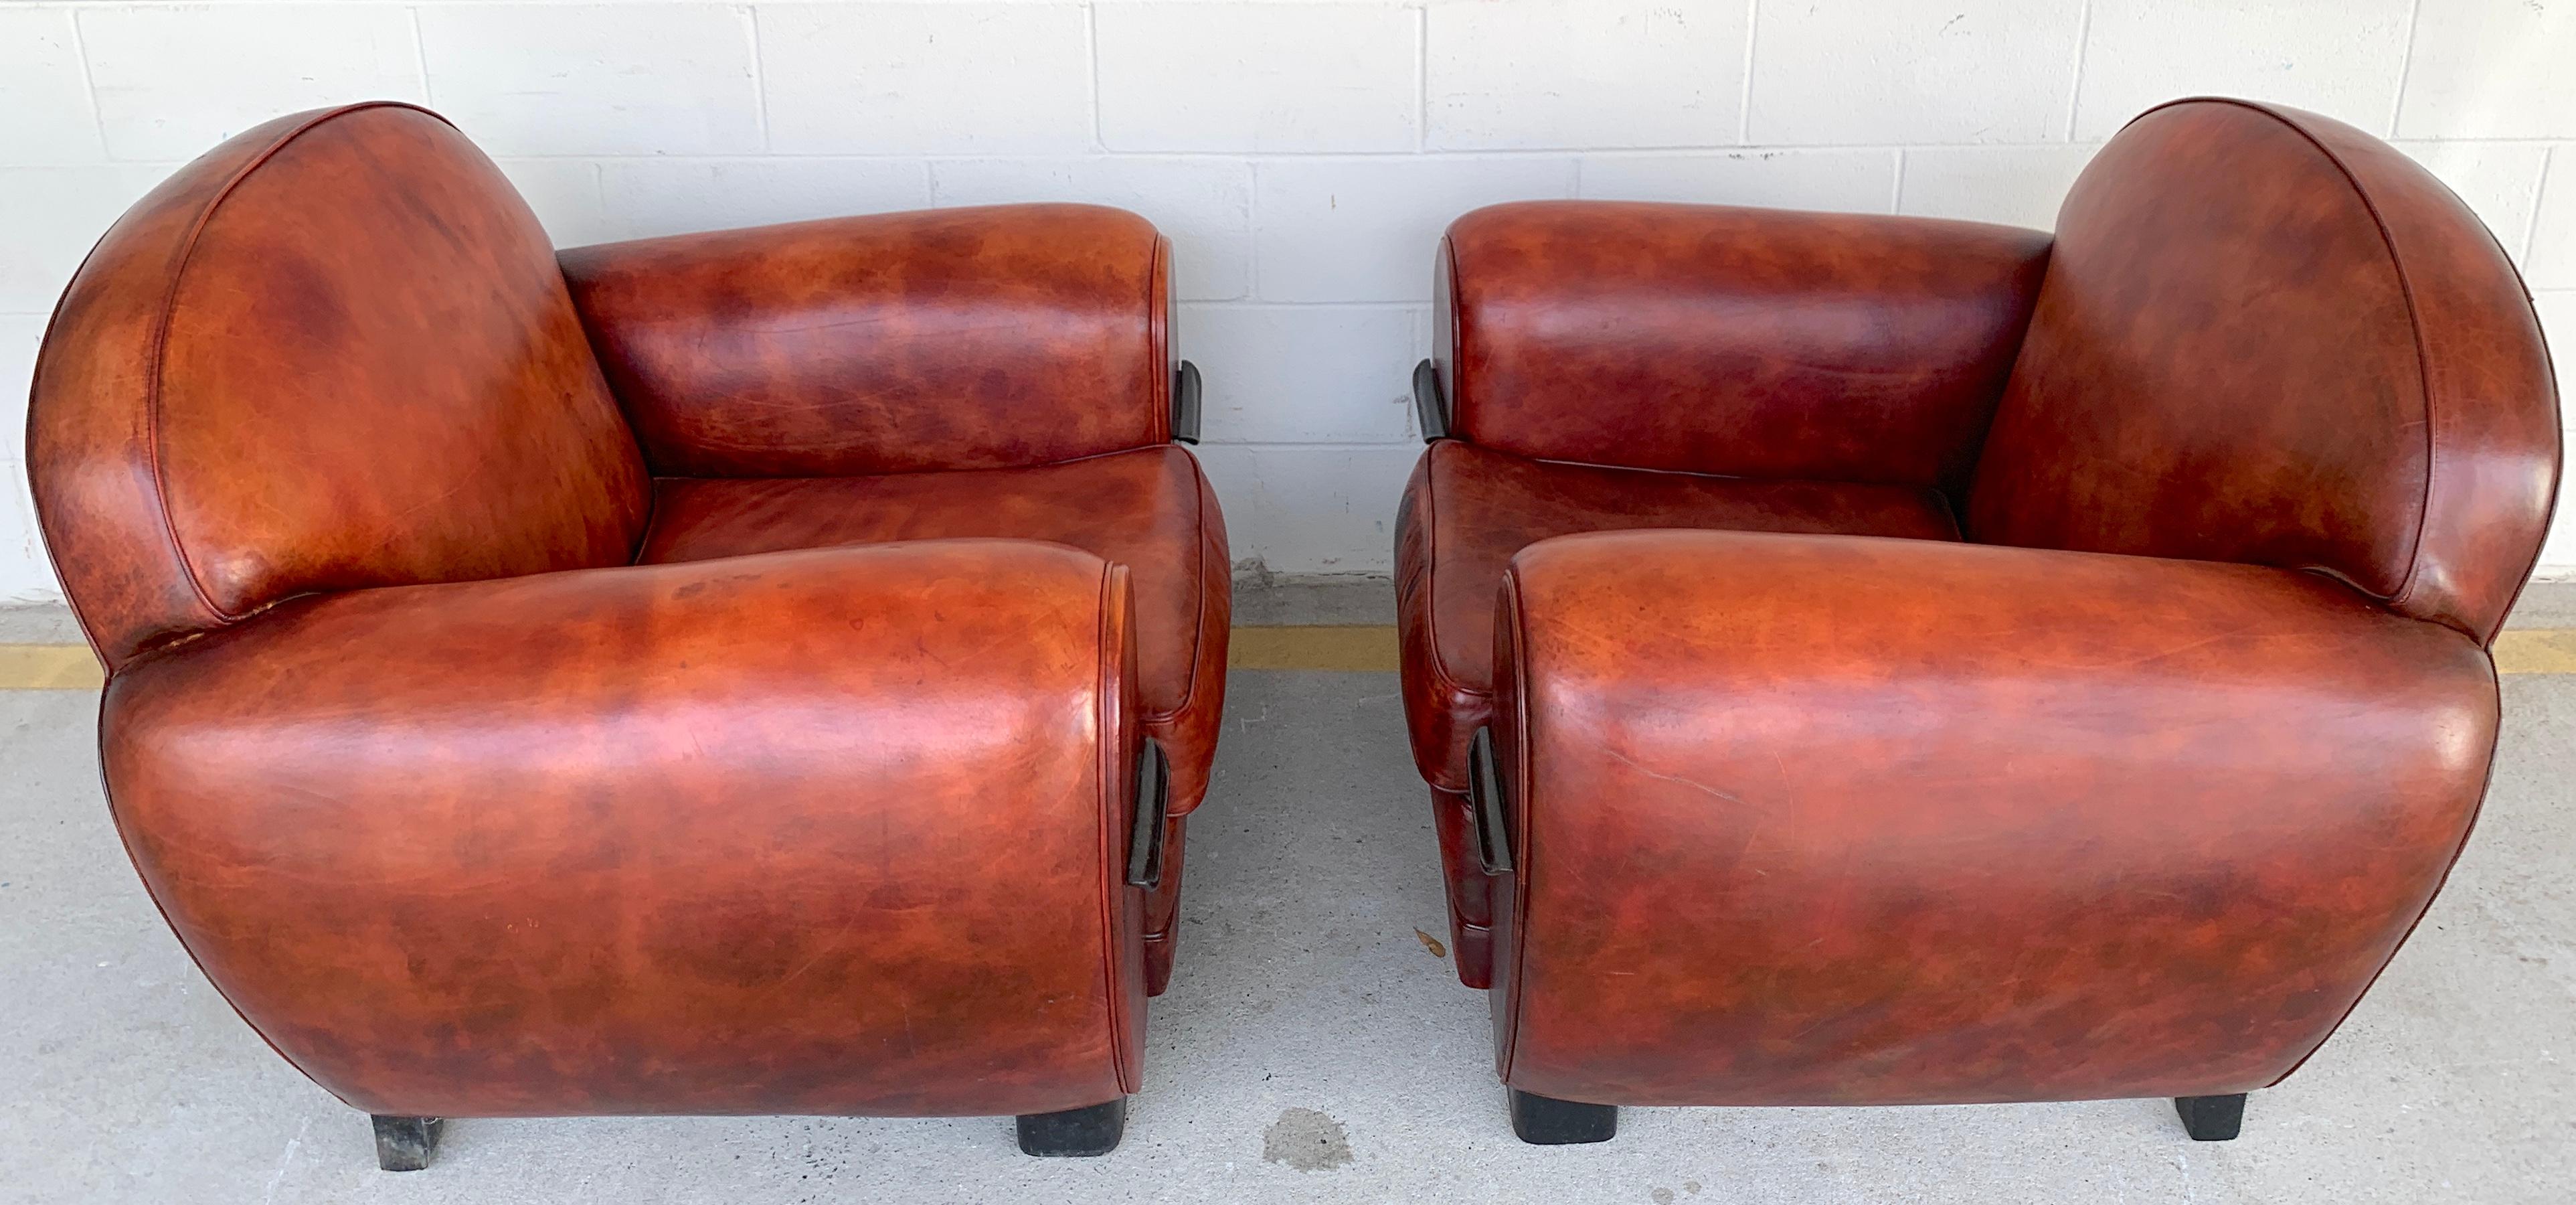 Pair of French Art Deco Leather Club Chairs For Sale 2